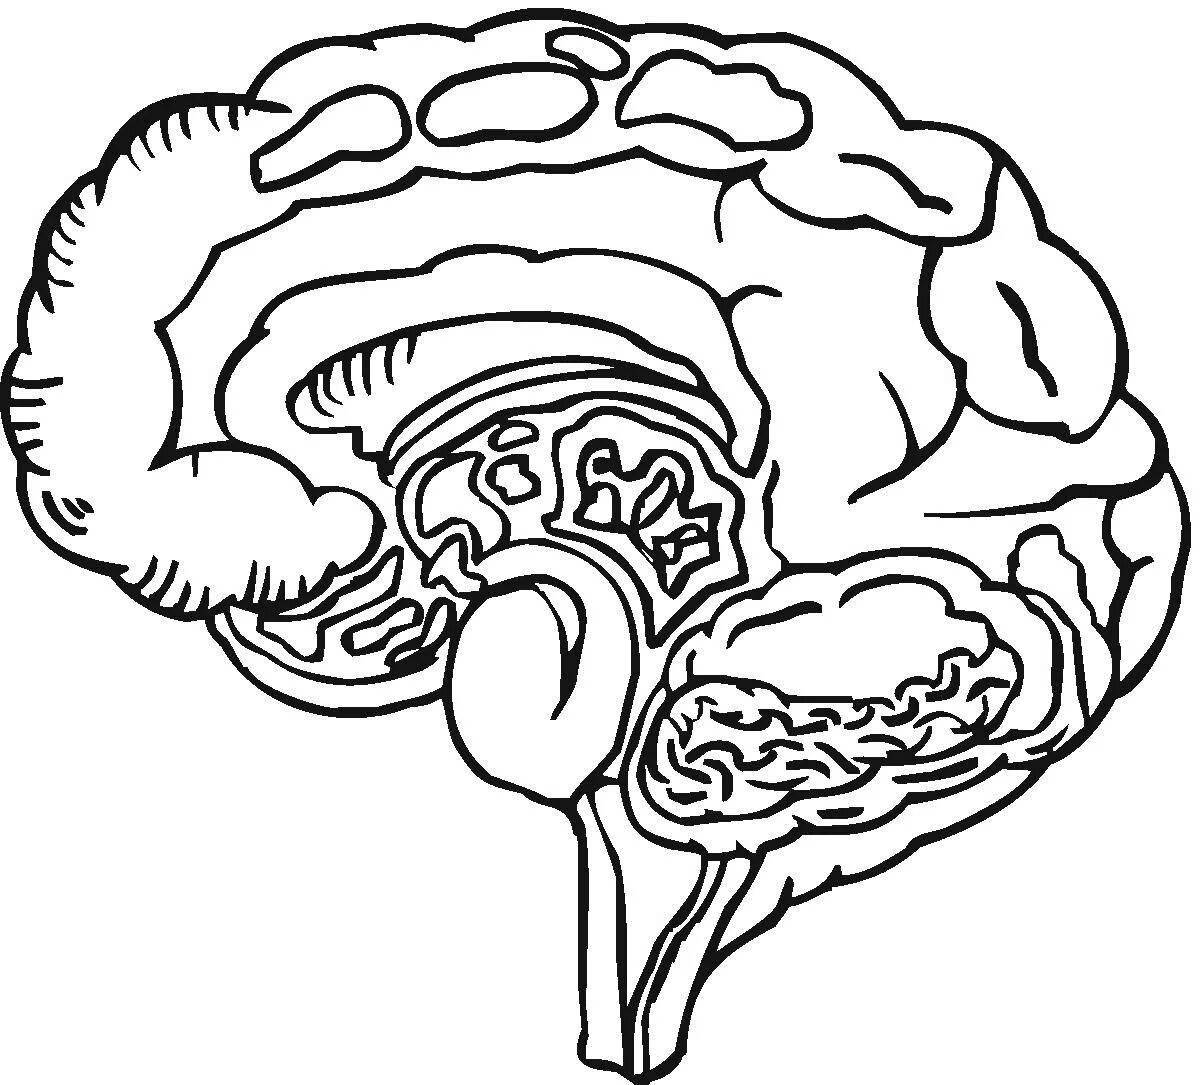 Intricate human brain coloring page for kids